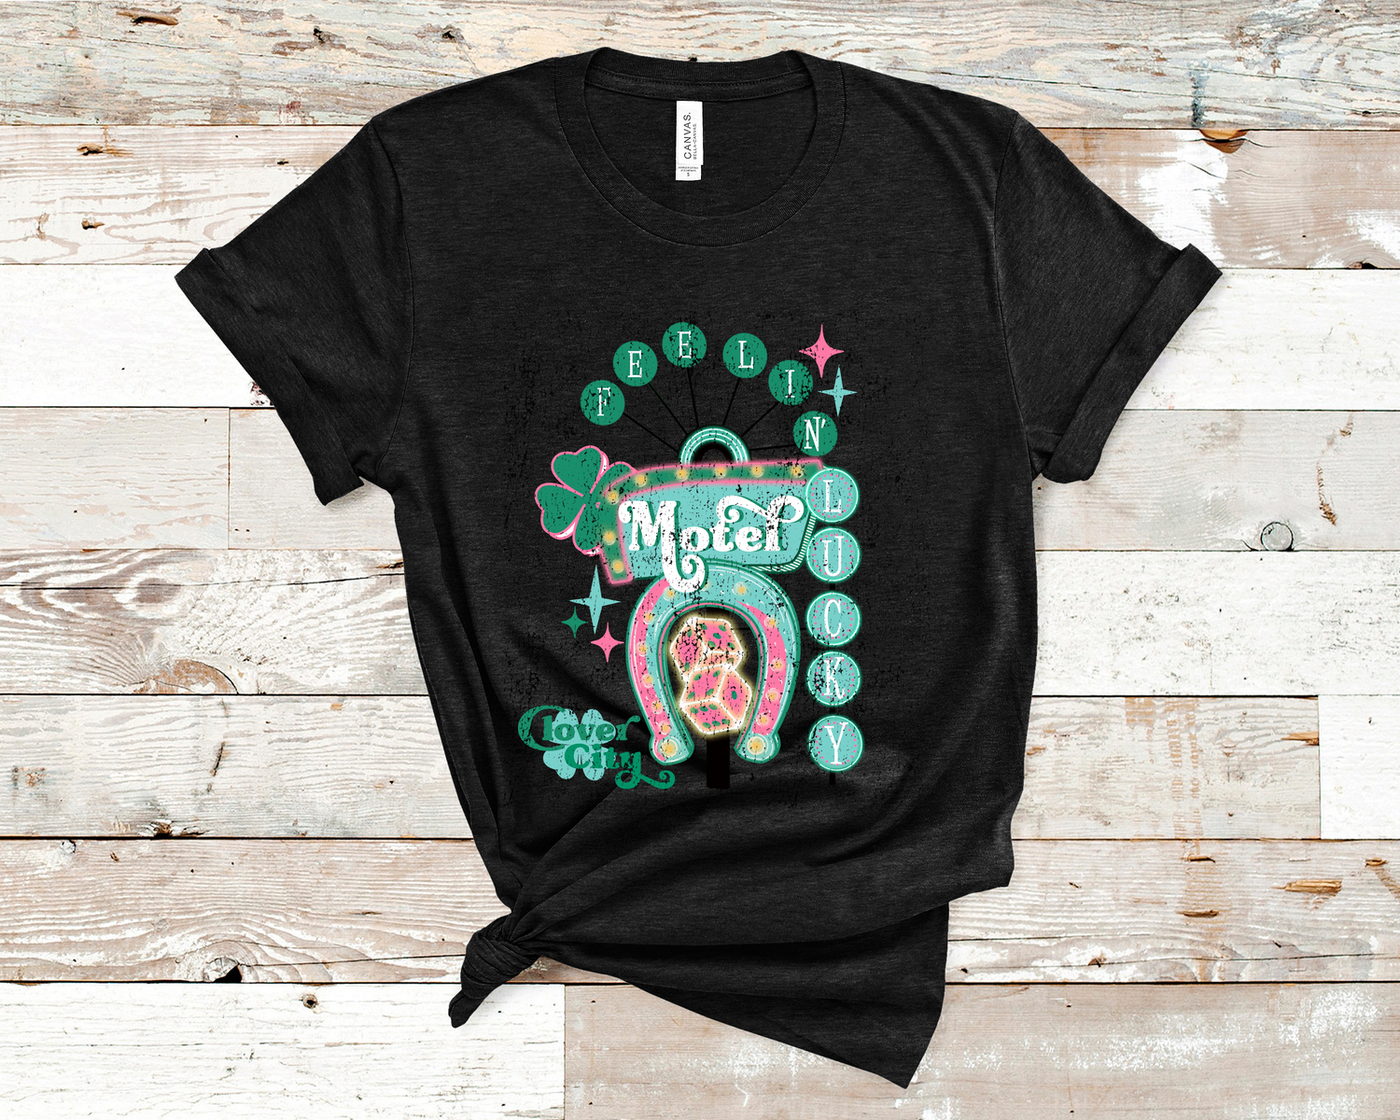 Heather Black Tee. Graphic of a vintage Neon Sign The word feeling with each letter in green circles at the top with the word lucky down the side with each letter in a turquoise circle. There is a sign in the center with the word motel in it, underneath there is a horse shoe with dice inside at he bottom of the sign. There is also a four leaf clover with the word clover city over it in green.